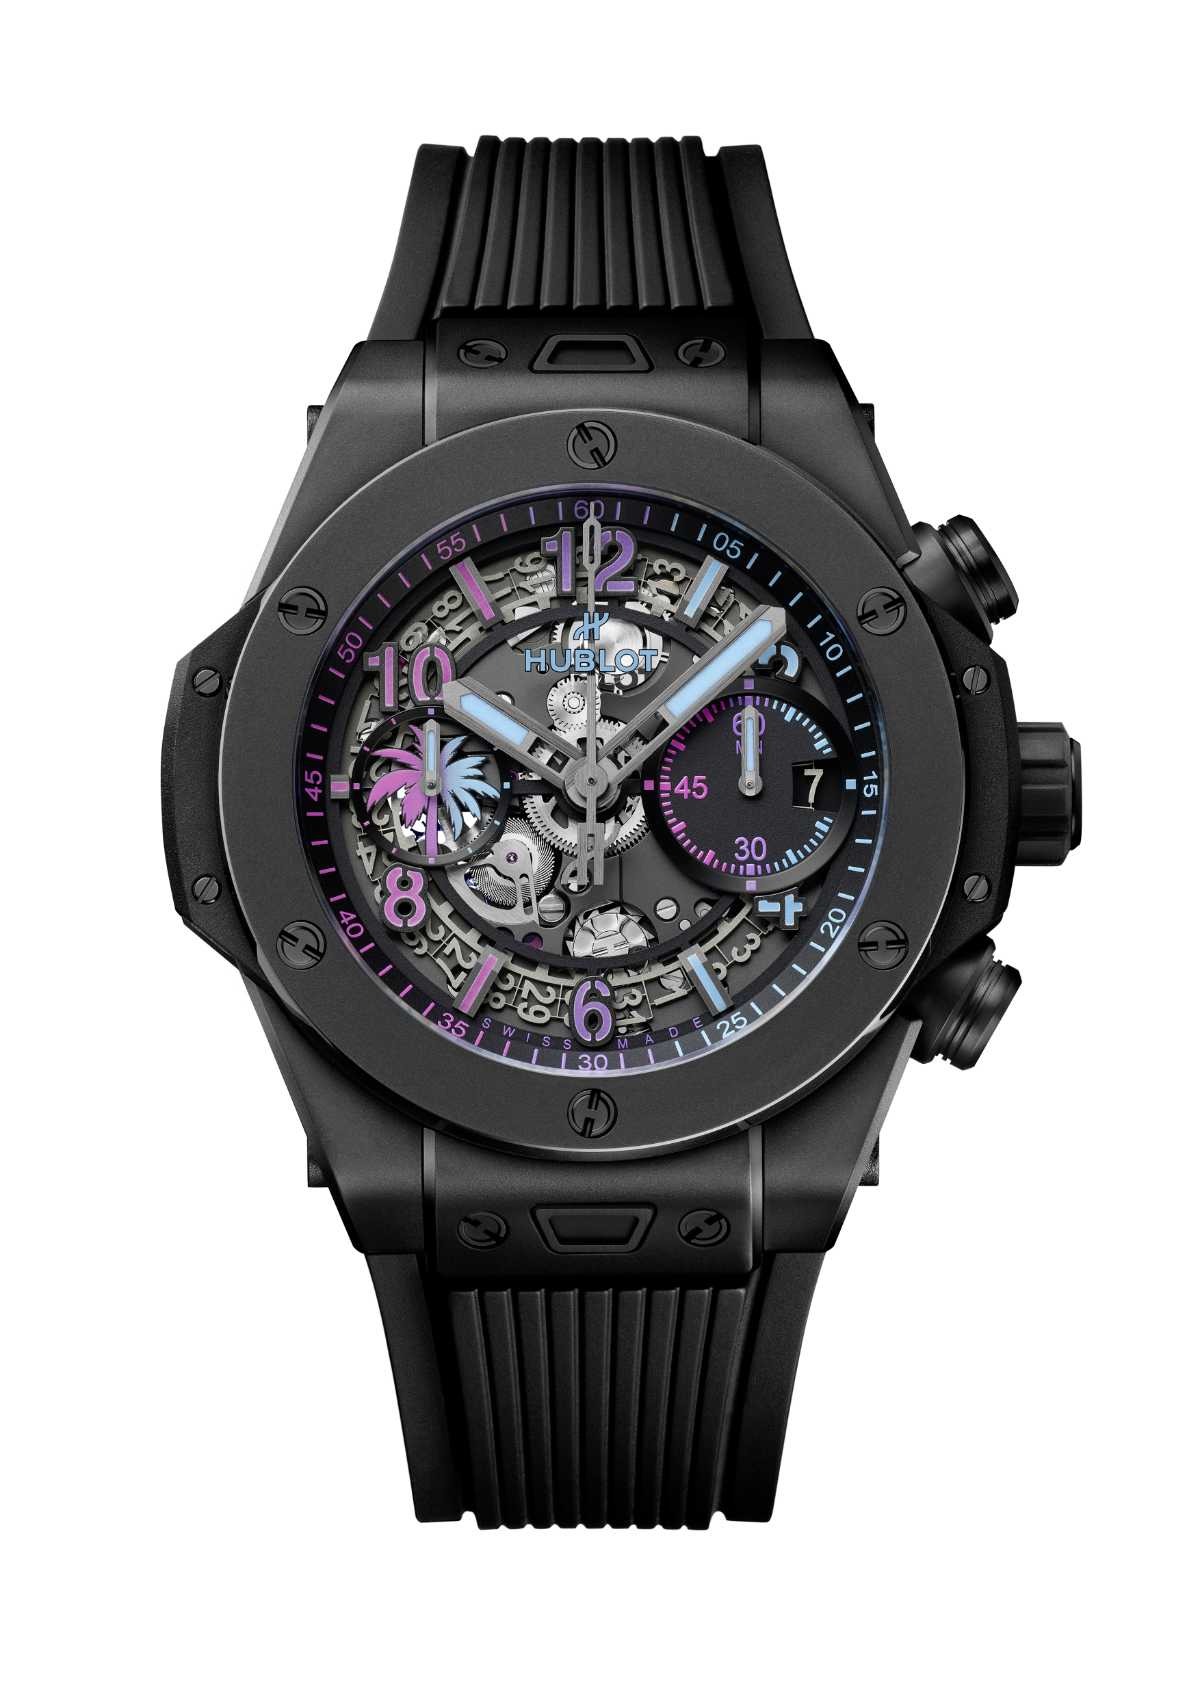 Hublot's Tribute To Miami - A Timepiece As Vibrant As The Magic City Itself